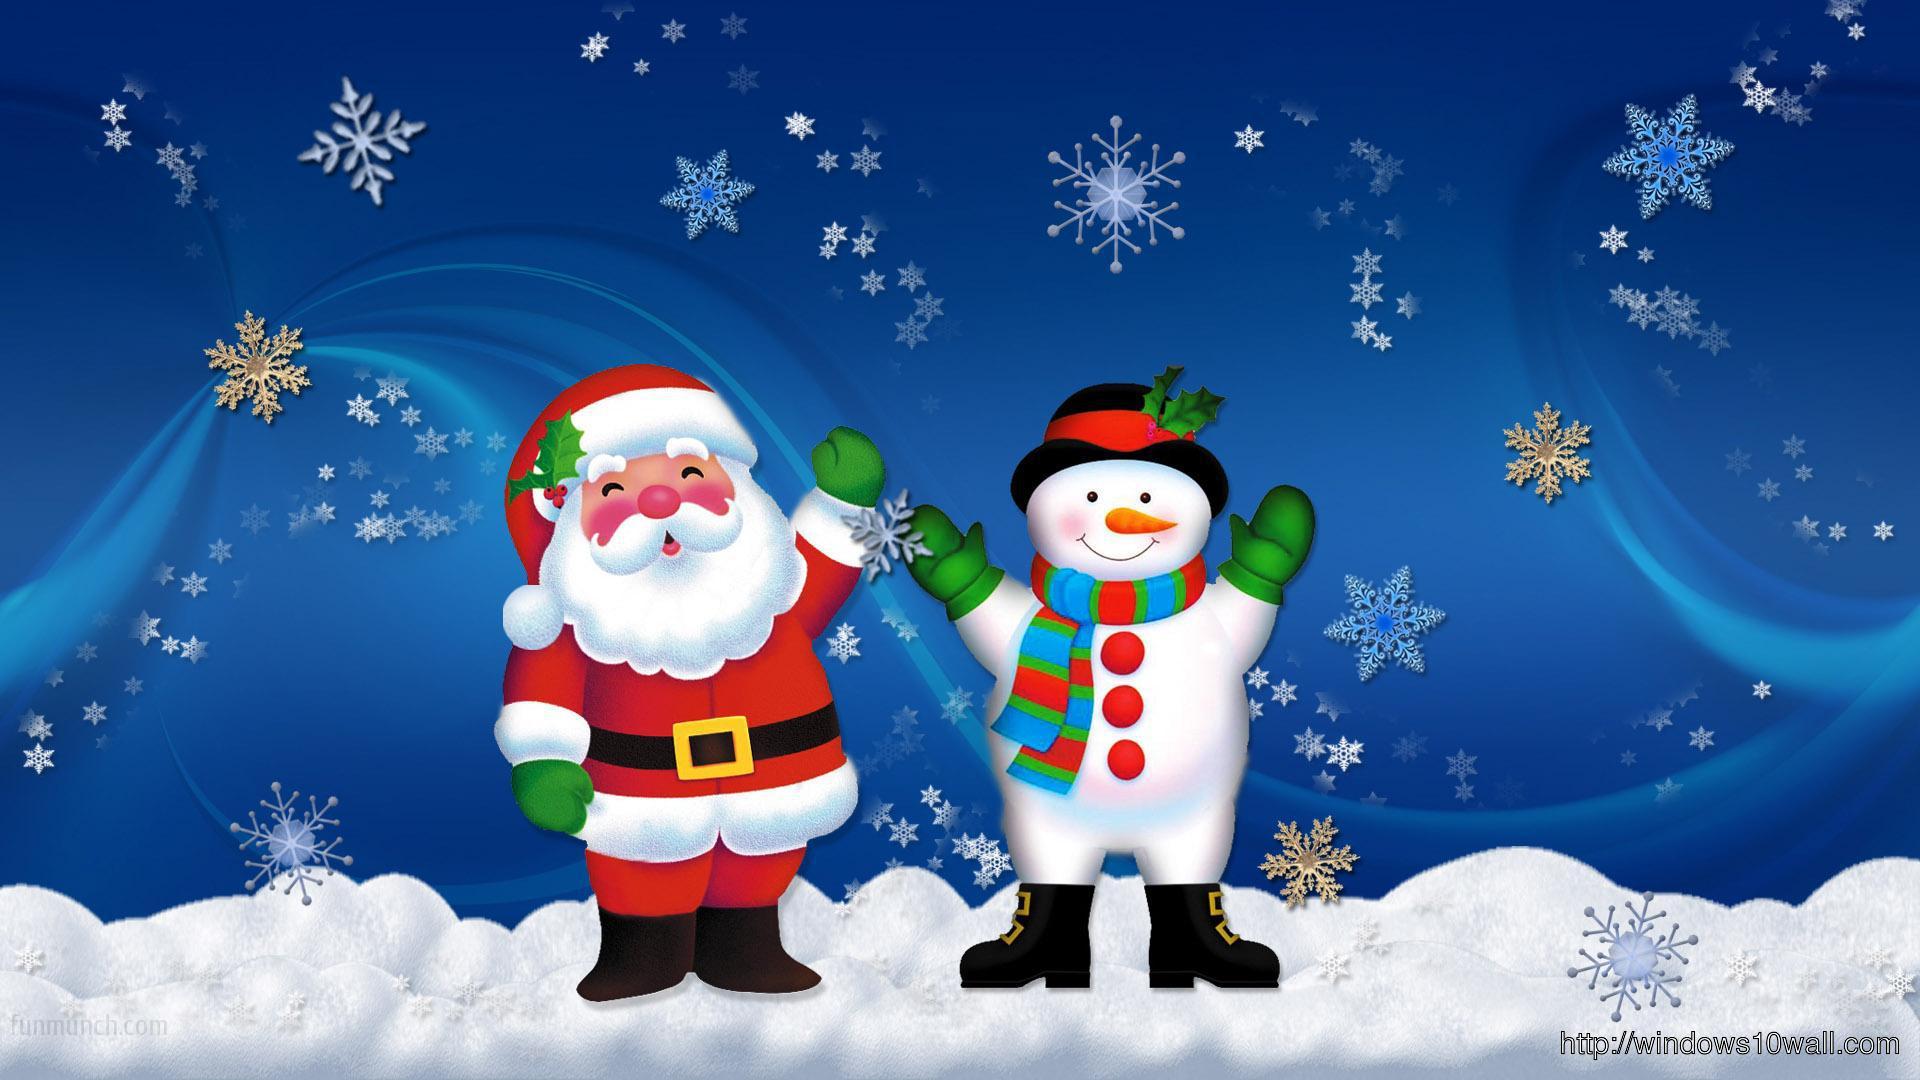 Christmas Background Wallpaper with Santa